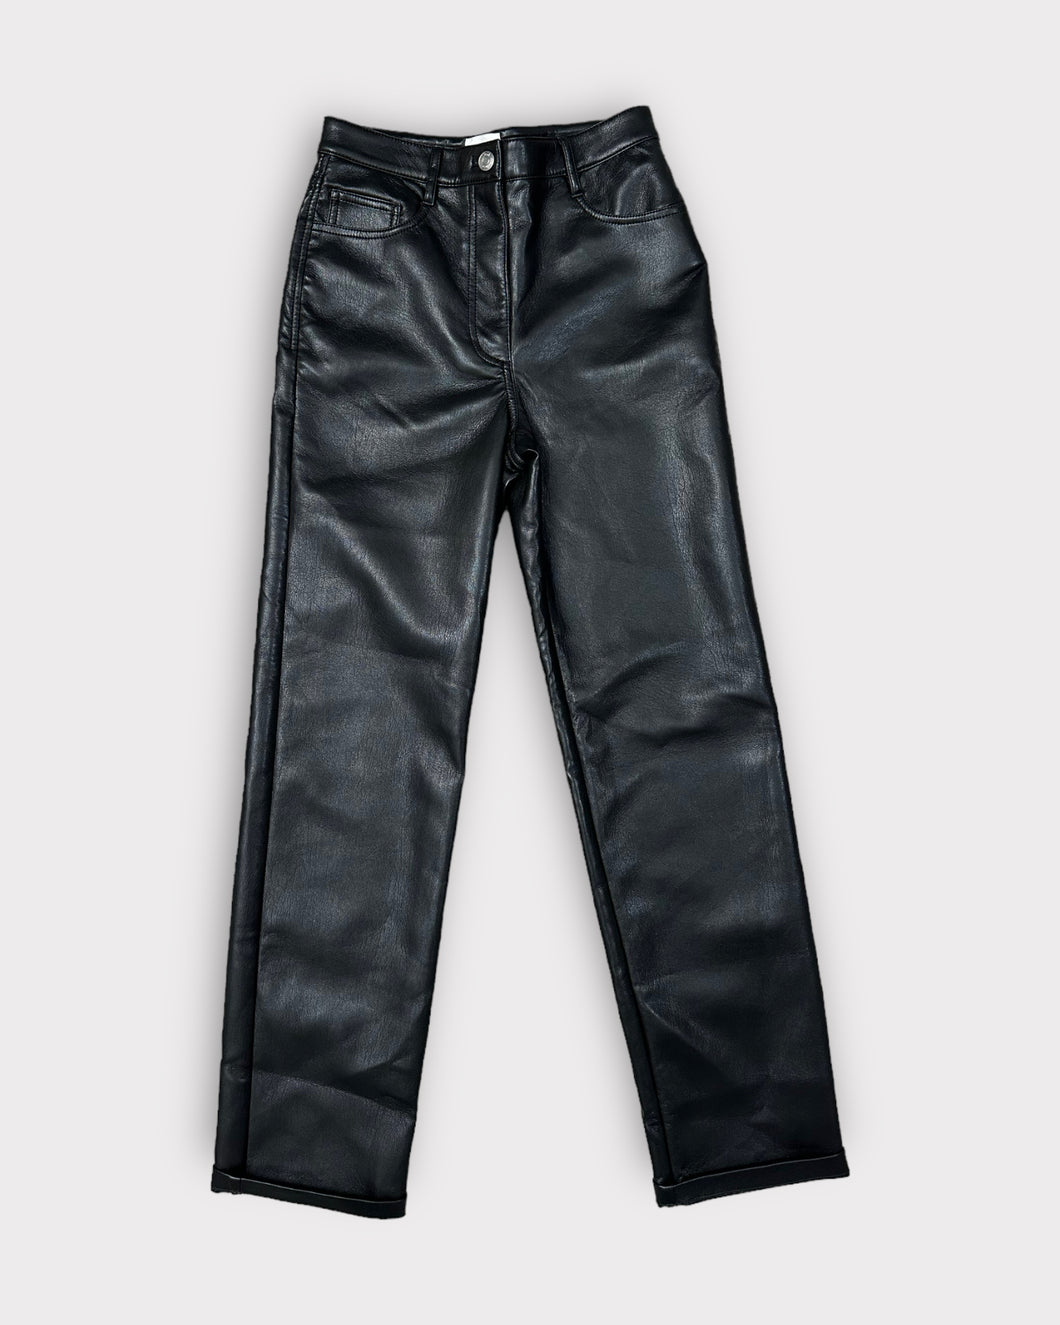 Aritzia Wilfred Faux Leather Black Pants (2)